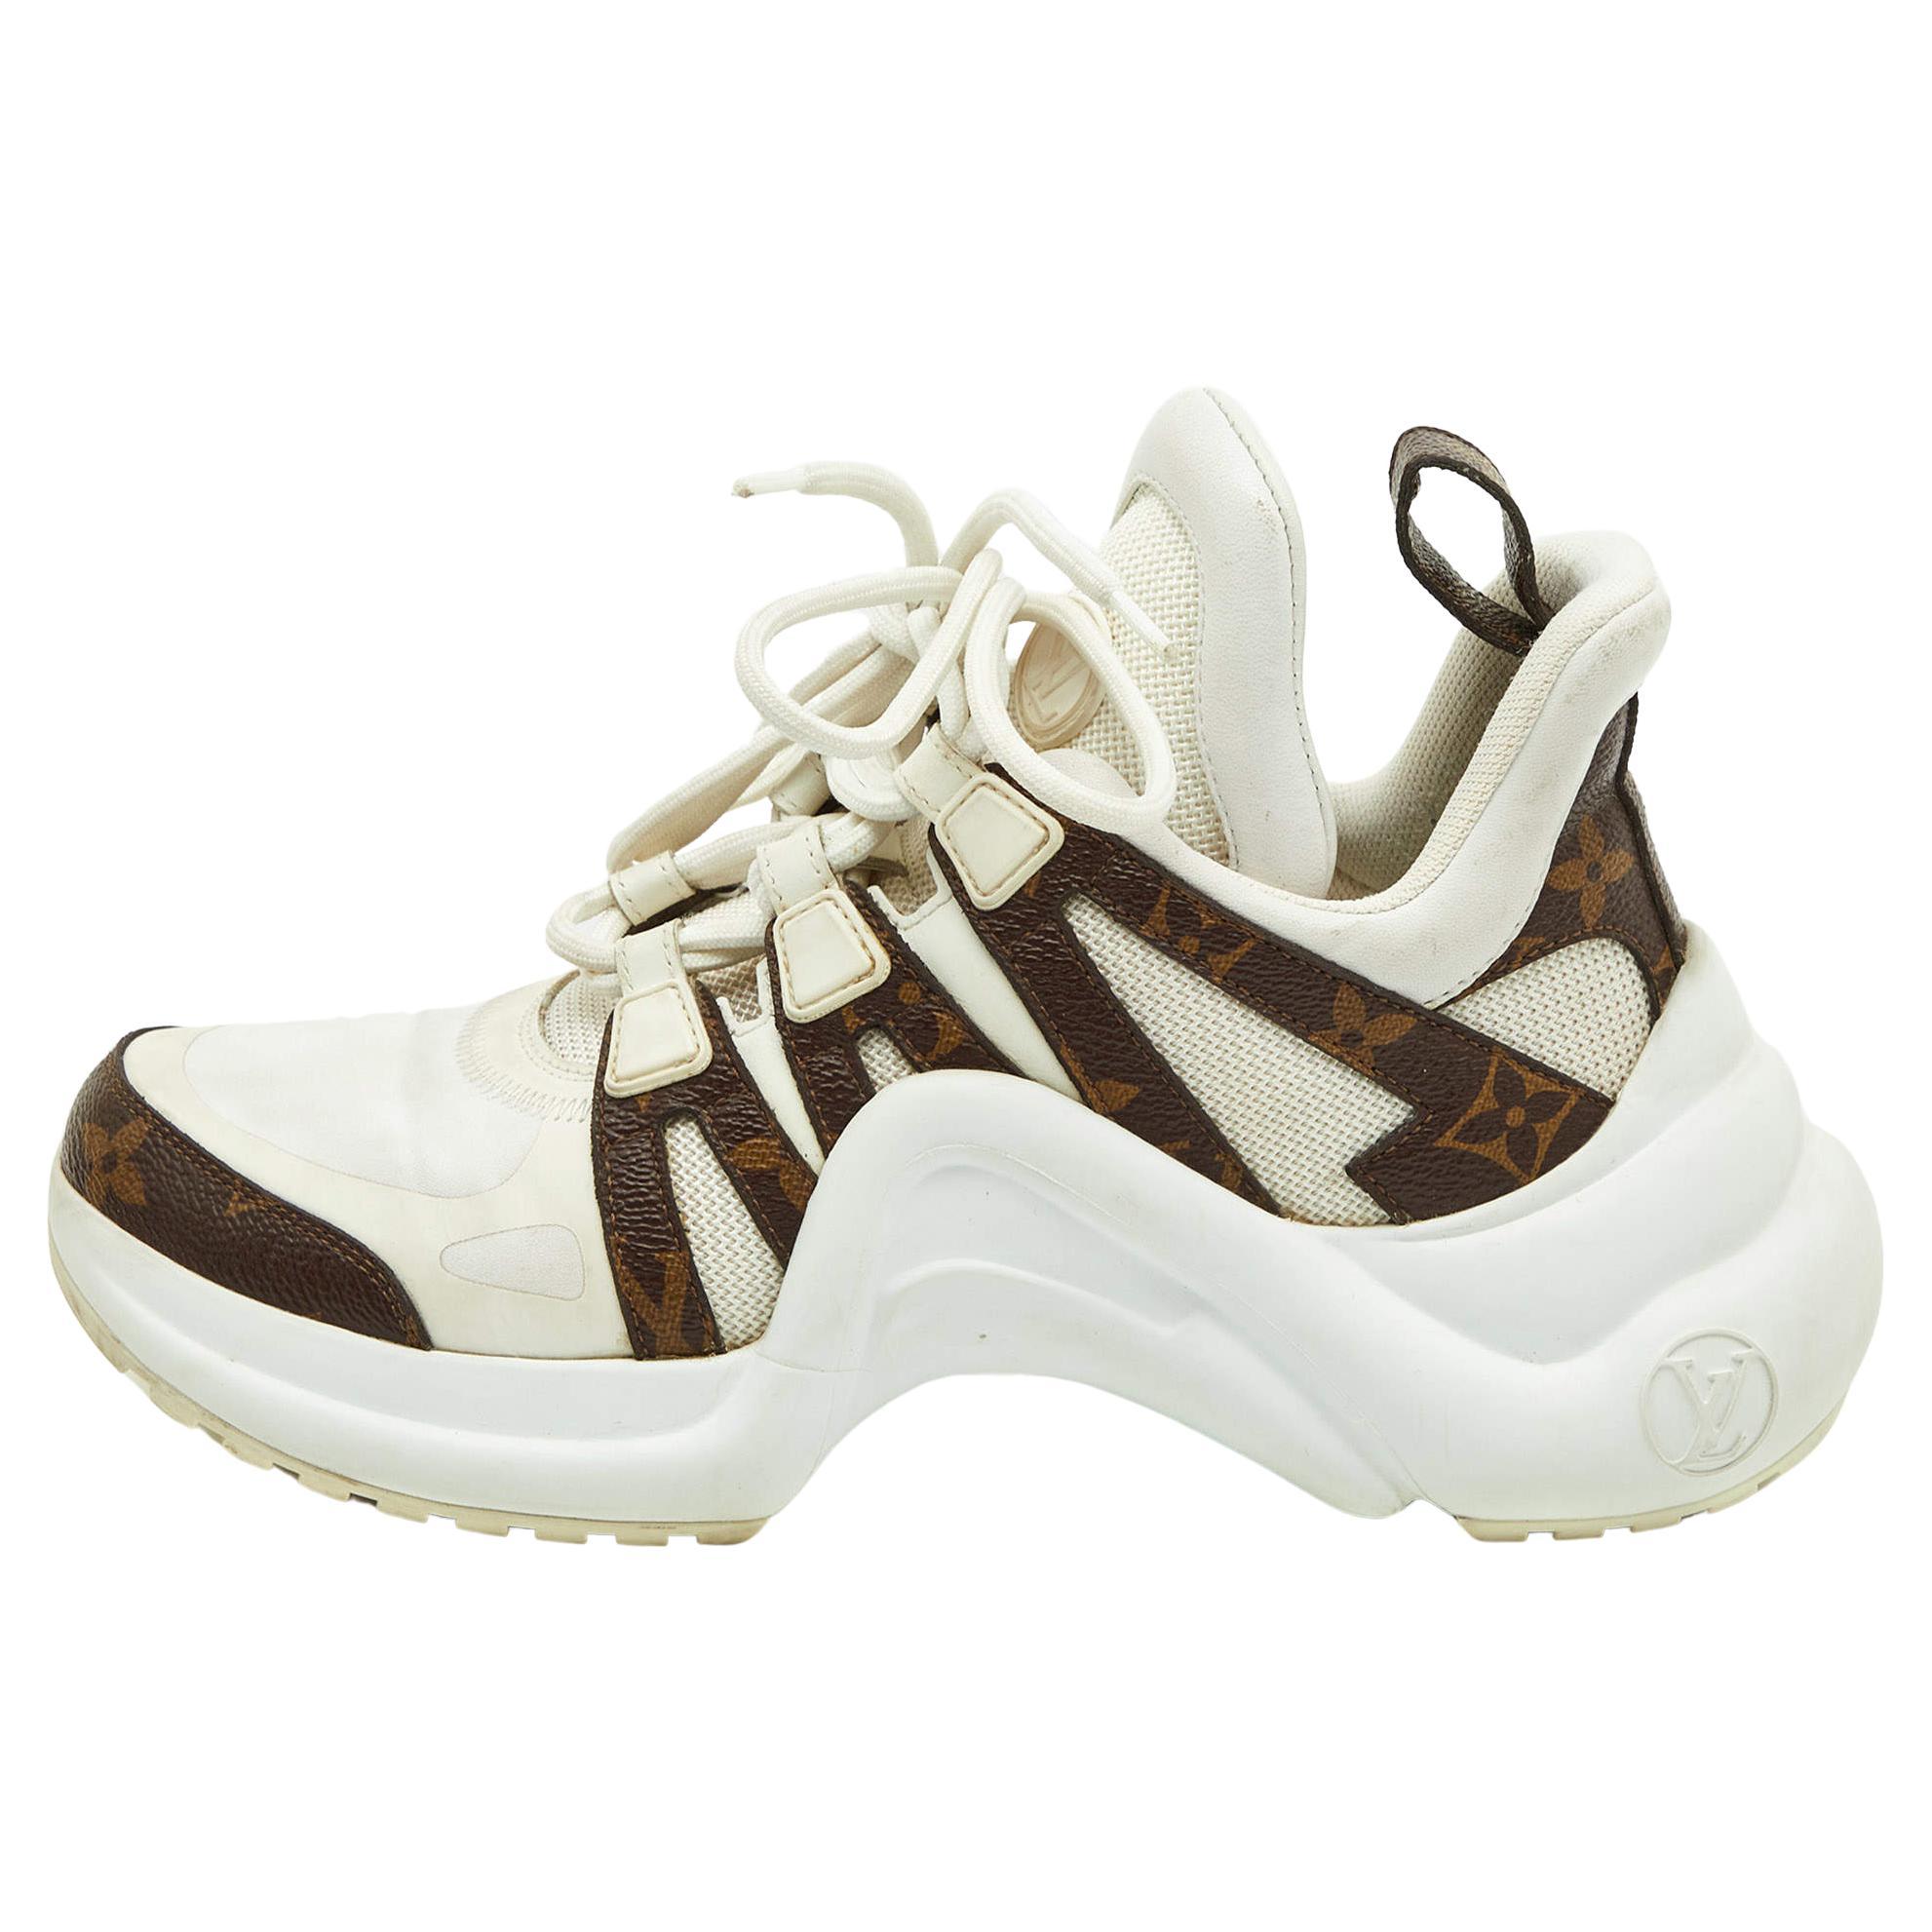 Louis Vuitton White Mesh and Monogram Canvas Archlight Sneakers Size 35.5 For Sale